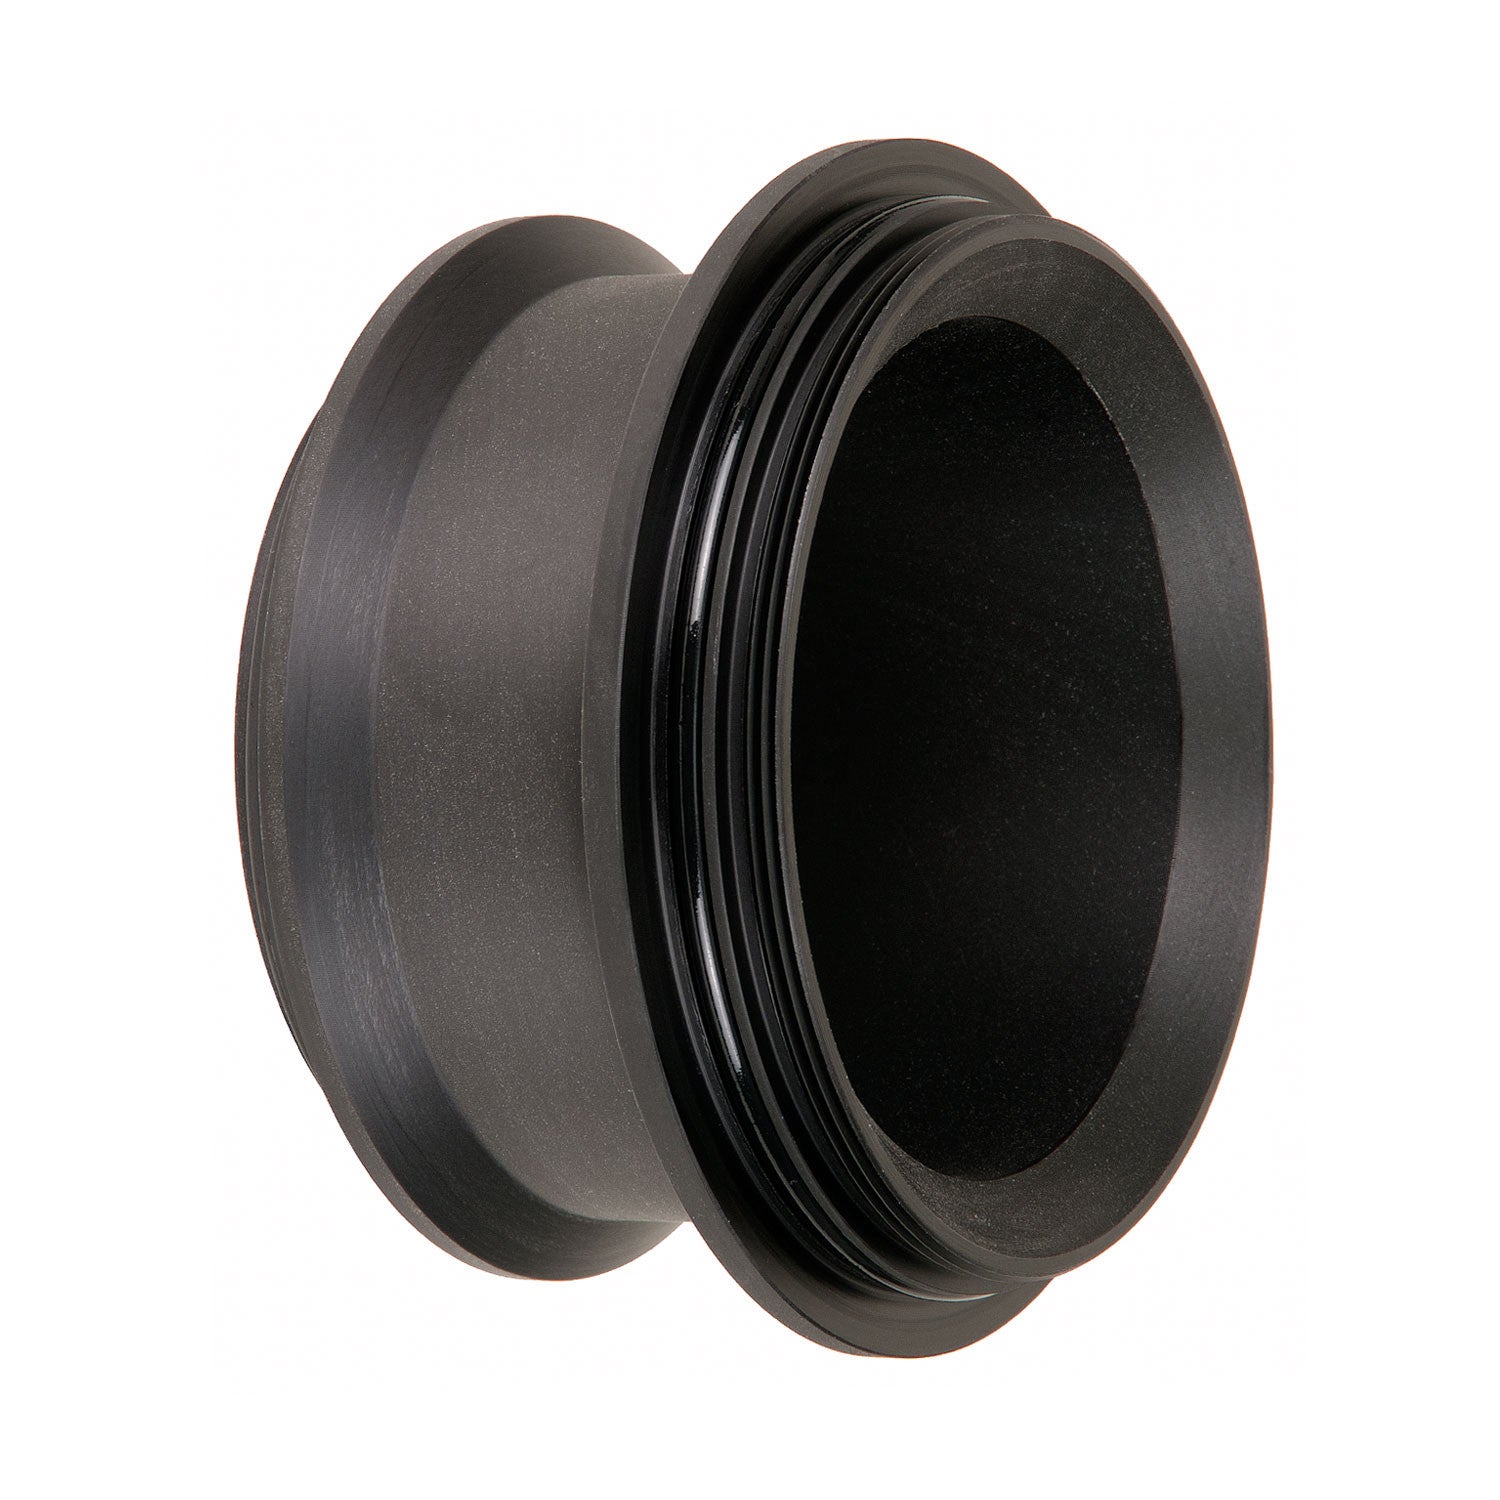 FL Extension for Lenses Up To 4.125 Inches